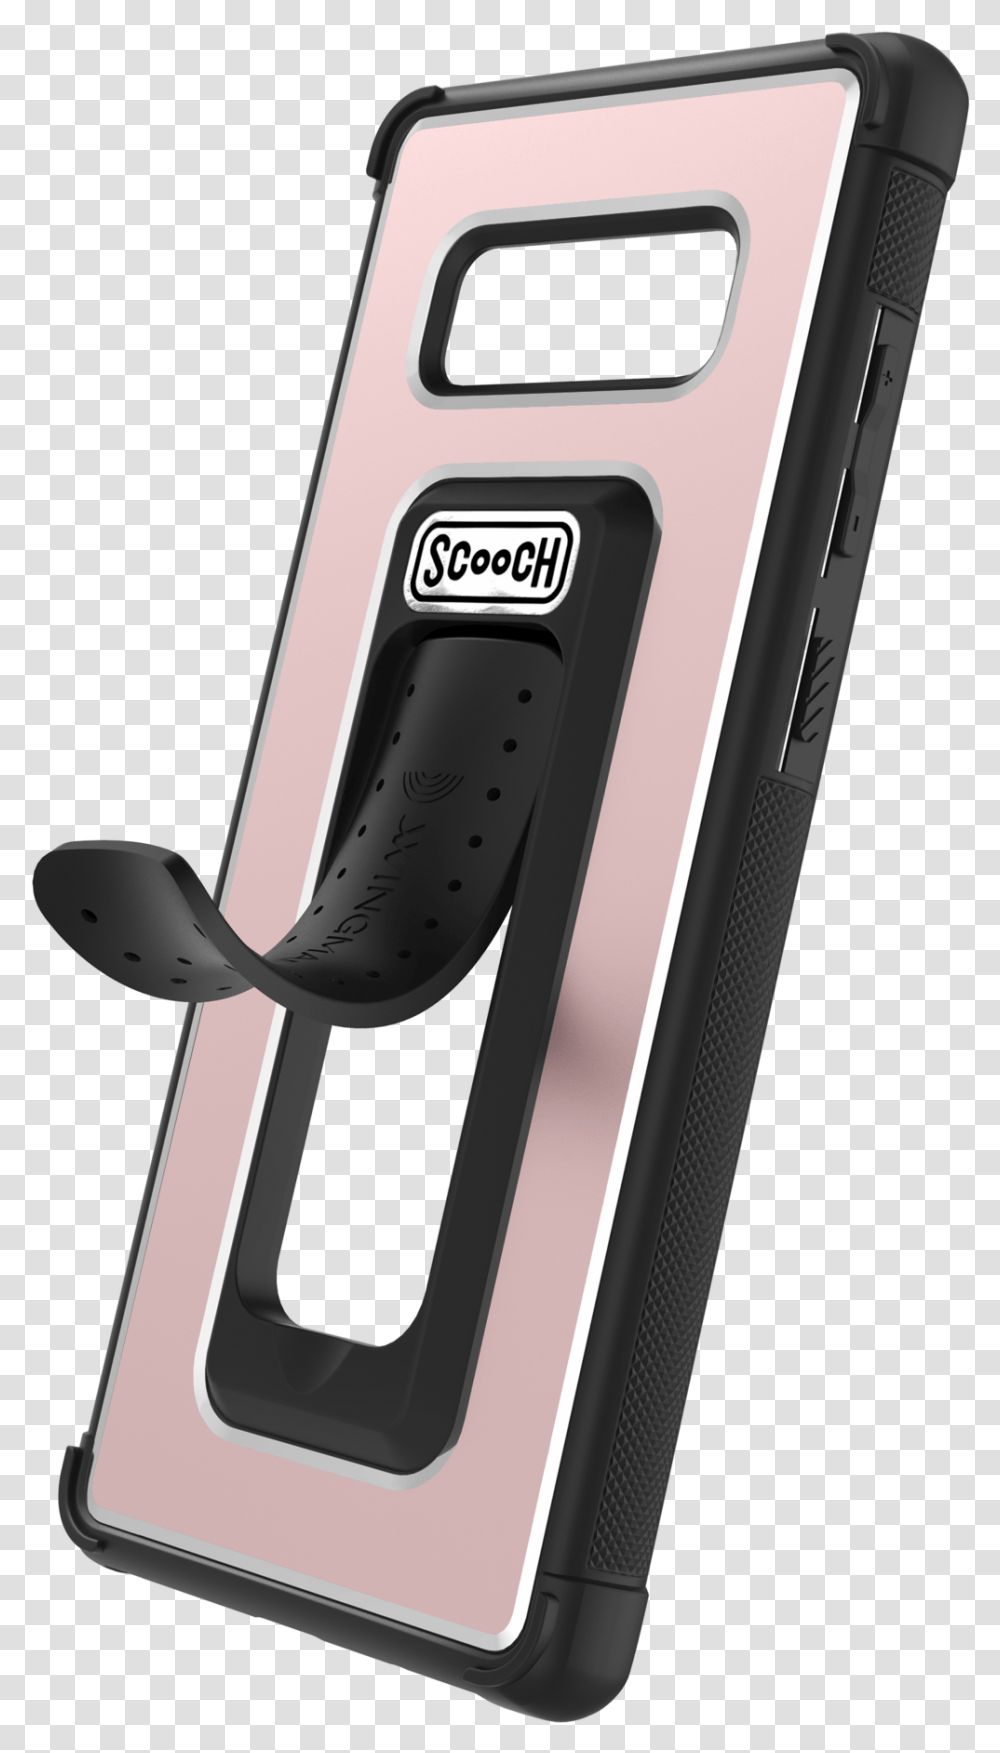 Scooch Case Wingman Scooch Wingman Samsung Galaxy Note, Phone, Electronics, Mobile Phone, Cell Phone Transparent Png